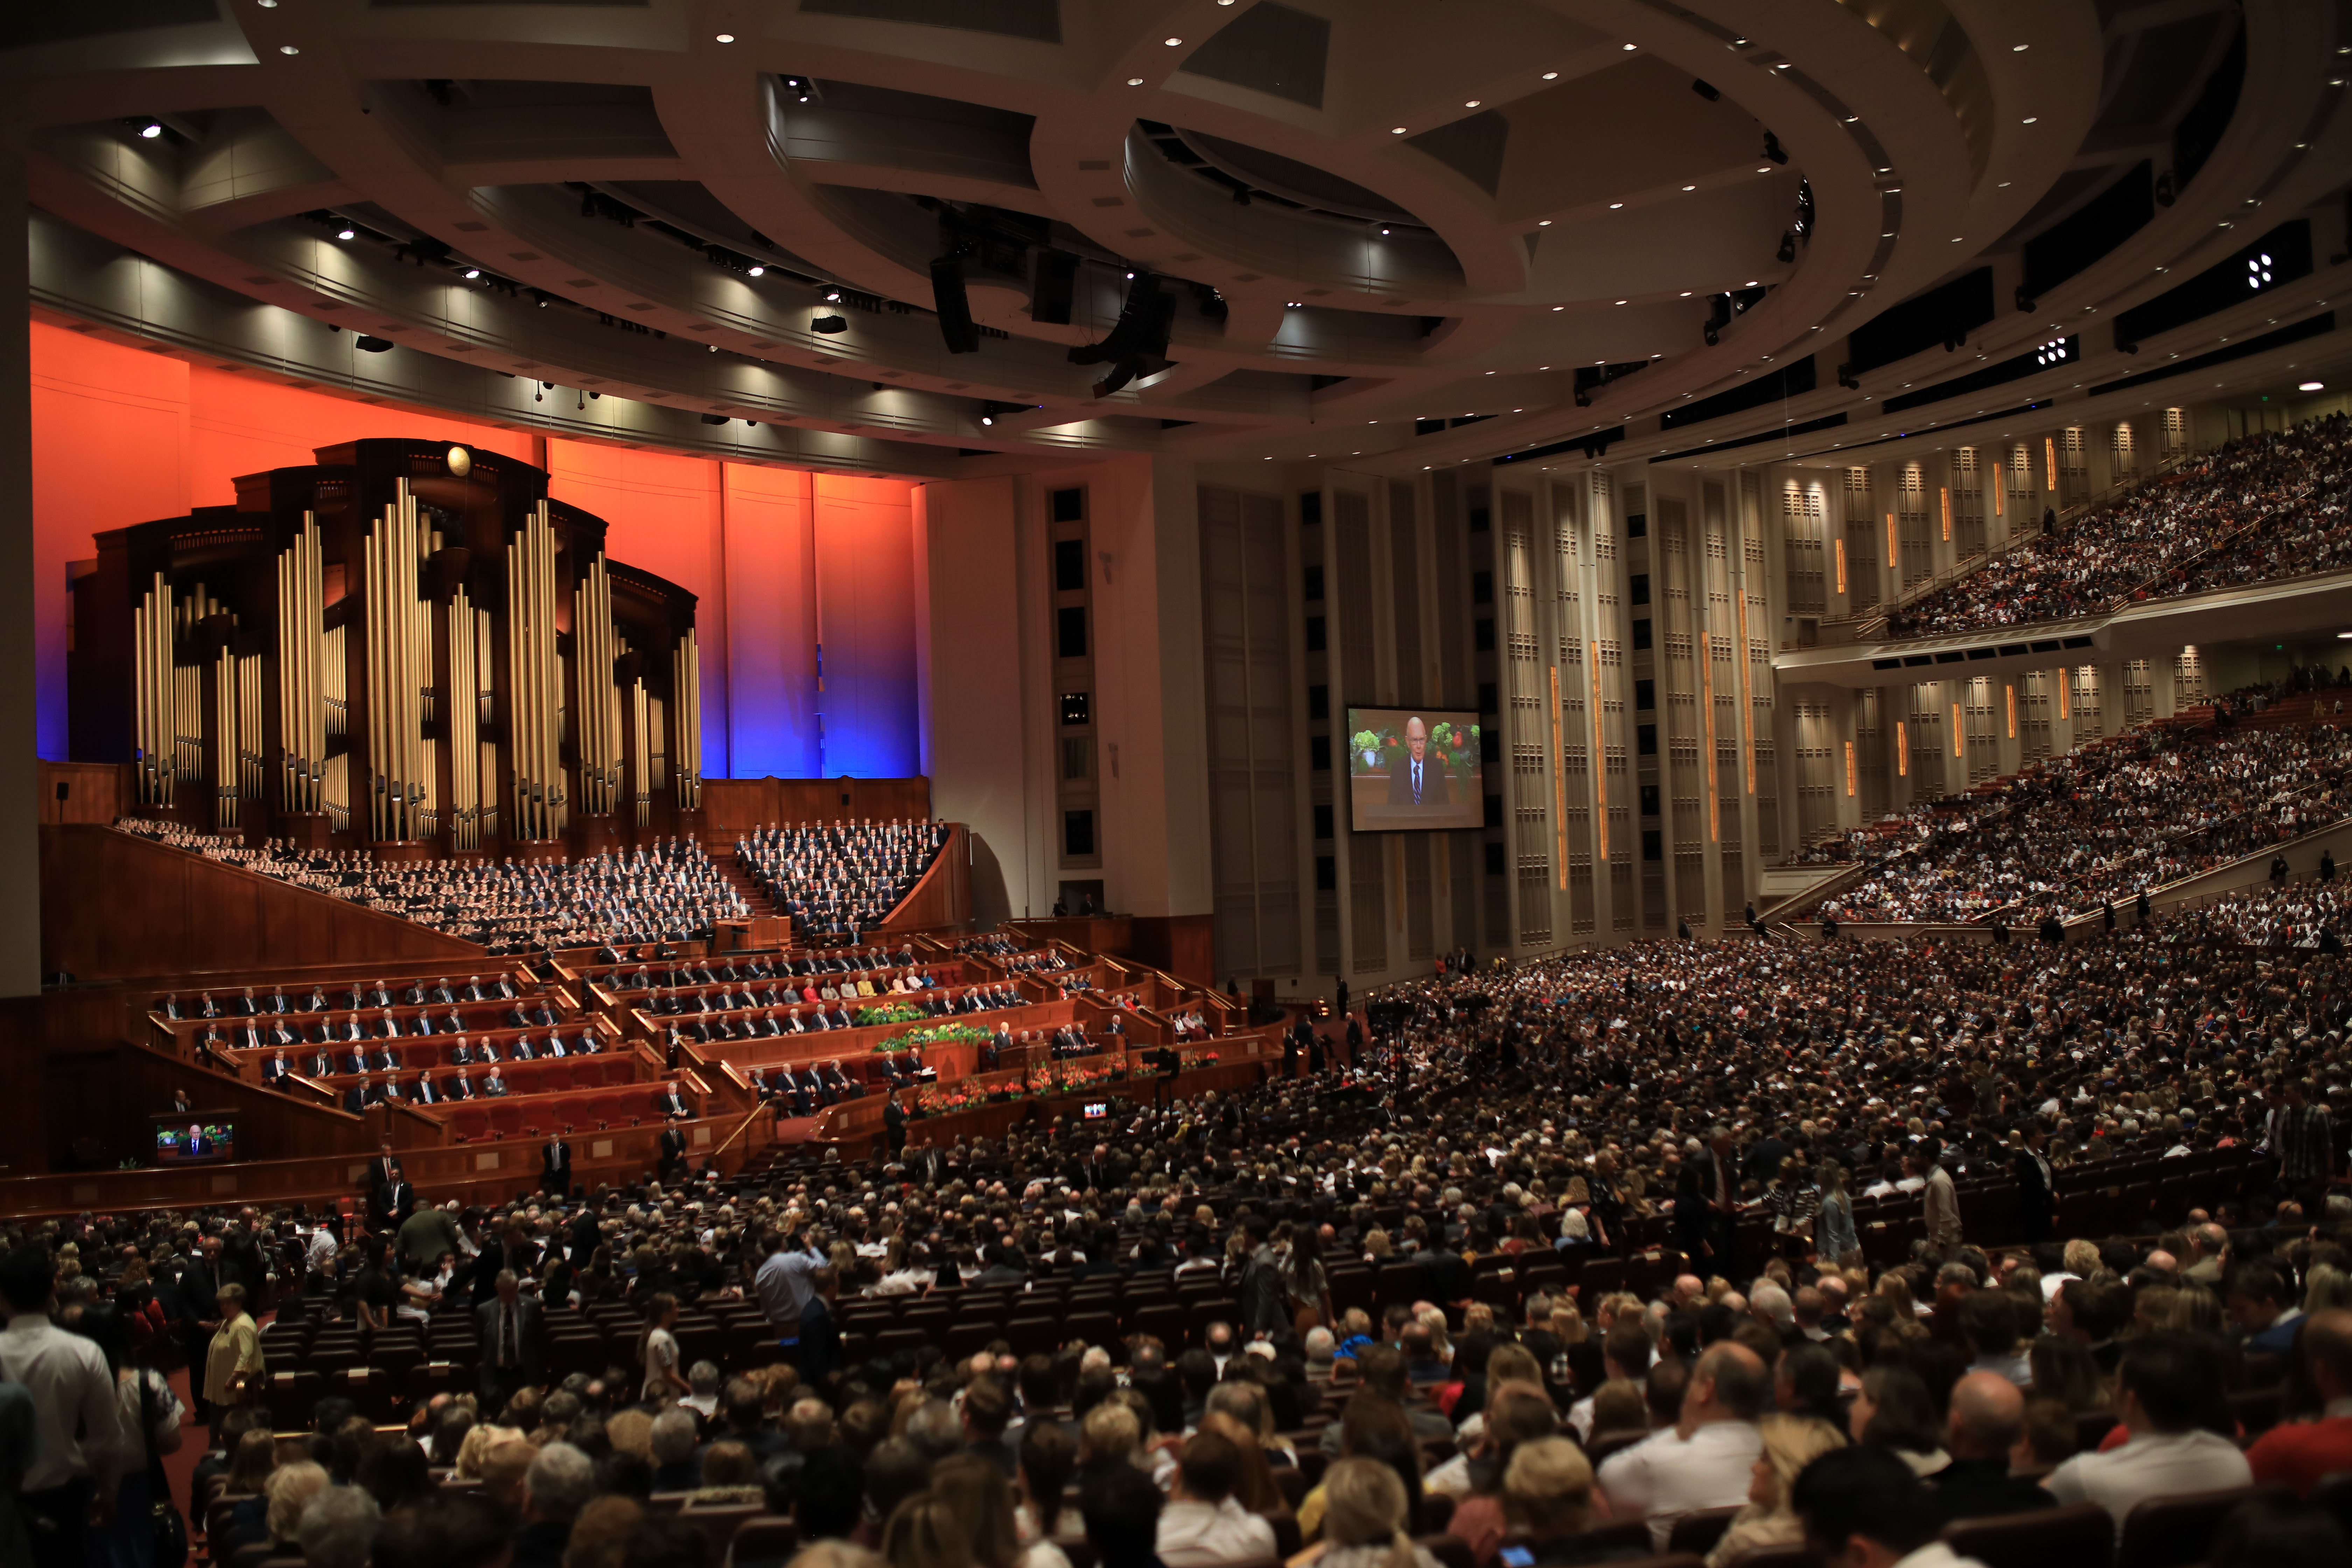 Church of Jesus Christ of Latter-day Saints to build 8 new temples ...